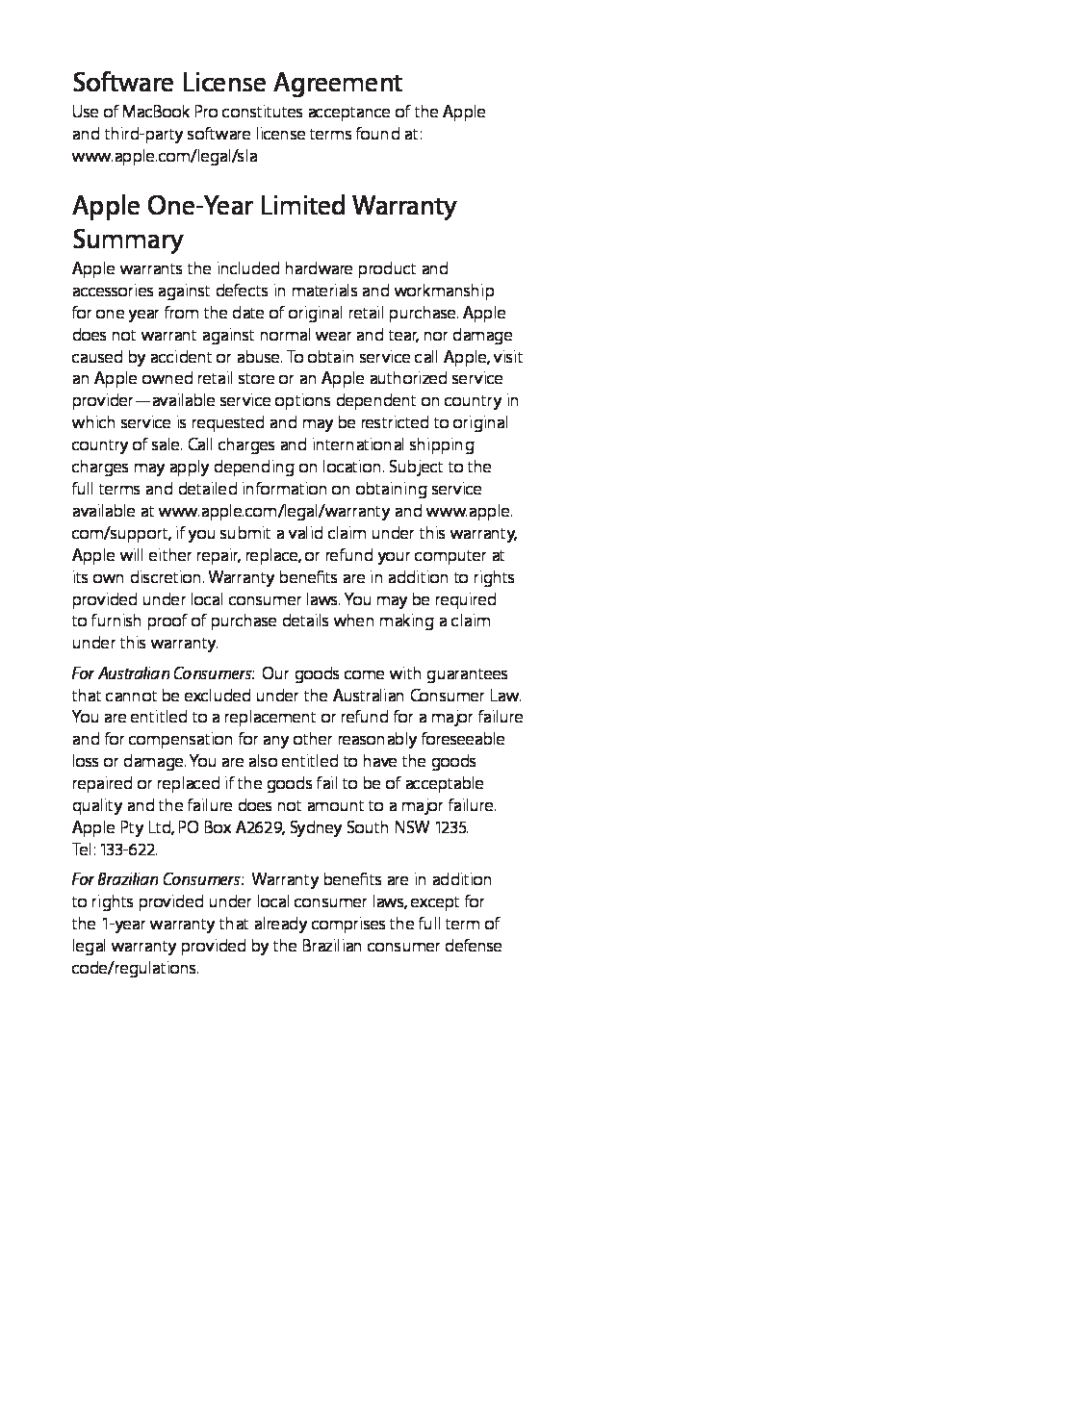 Apple ME116LL/A, ME662LL/A manual Software License Agreement, Apple One-Year Limited Warranty Summary 